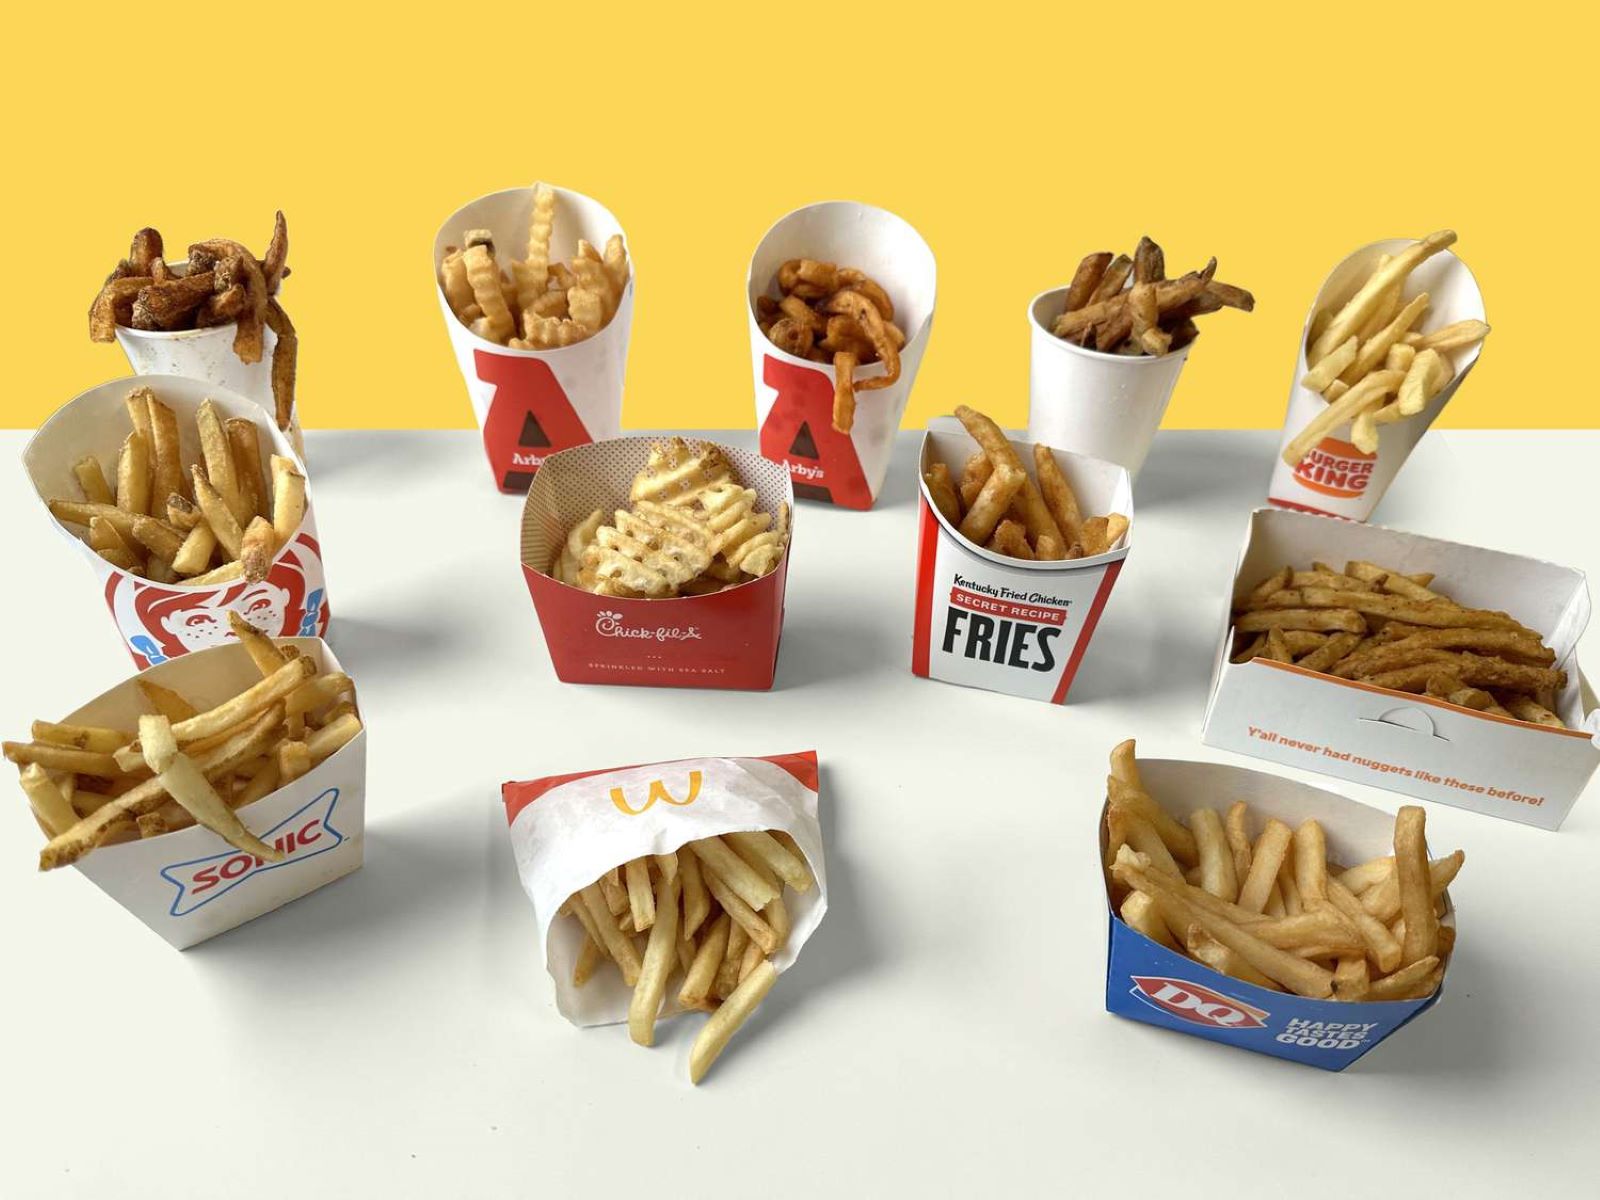 The Ultimate Ranking Of America's Best Fast Food Chain Fries - You Won't Believe Who Takes The Top Spot!